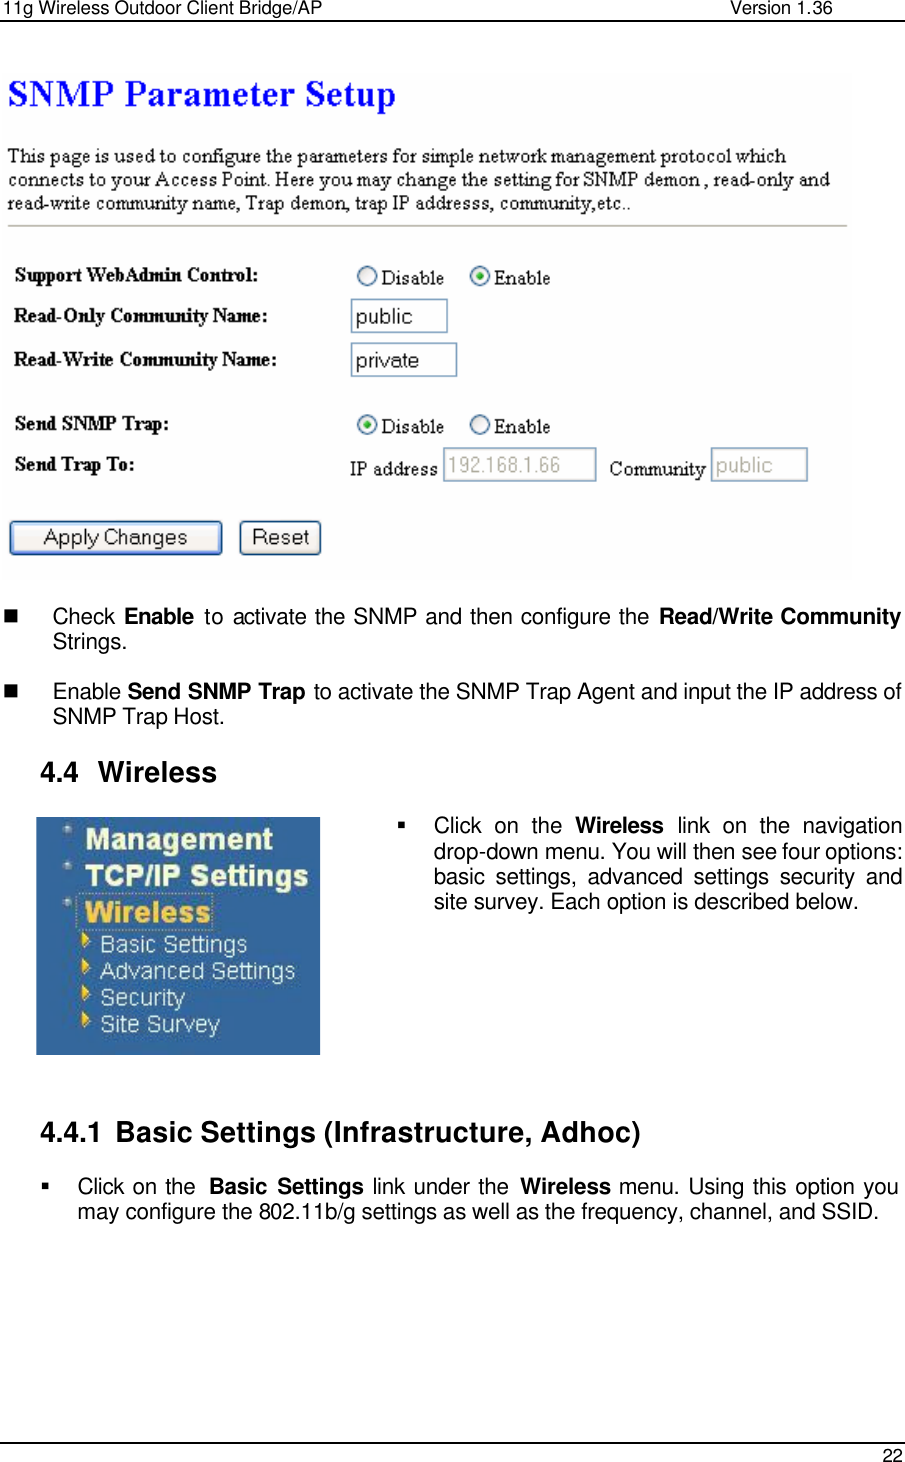 11g Wireless Outdoor Client Bridge/AP                Version 1.36    22     n Check  Enable to activate the SNMP and then configure the Read/Write Community Strings.  n Enable Send SNMP Trap to activate the SNMP Trap Agent and input the IP address of SNMP Trap Host.  4.4 Wireless § Click on the Wireless link on the navigation drop-down menu. You will then see four options: basic settings, advanced settings security and site survey. Each option is described below.          4.4.1 Basic Settings (Infrastructure, Adhoc) § Click on the  Basic Settings link under the Wireless menu. Using this option you may configure the 802.11b/g settings as well as the frequency, channel, and SSID.    